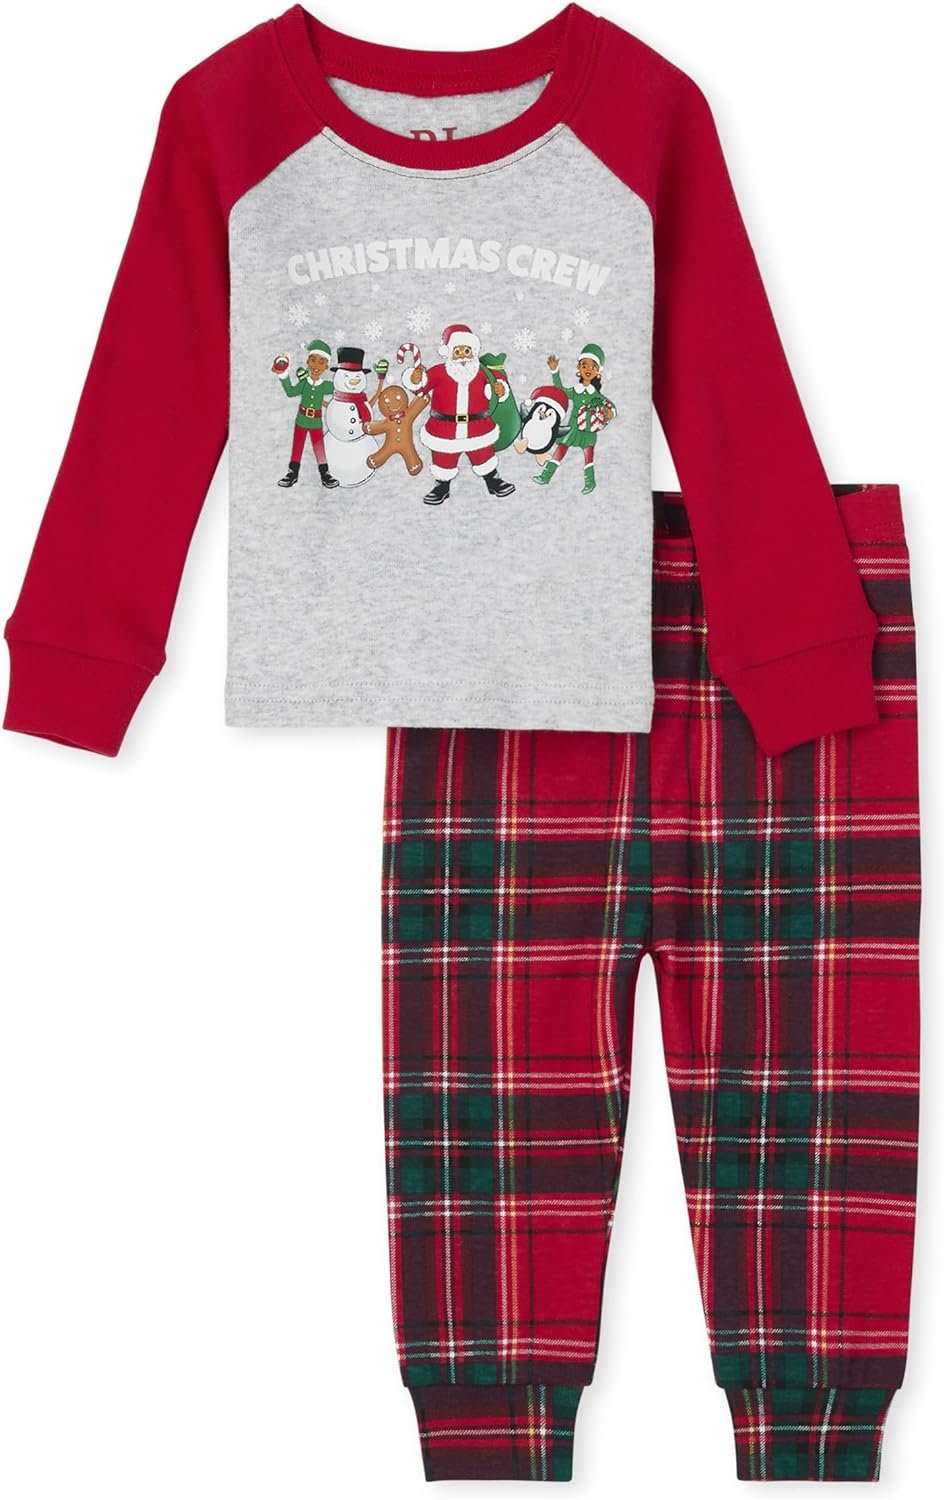 The Childrens Place Kids Family Matching, Festive Christmas Pajama Sets, Cotton